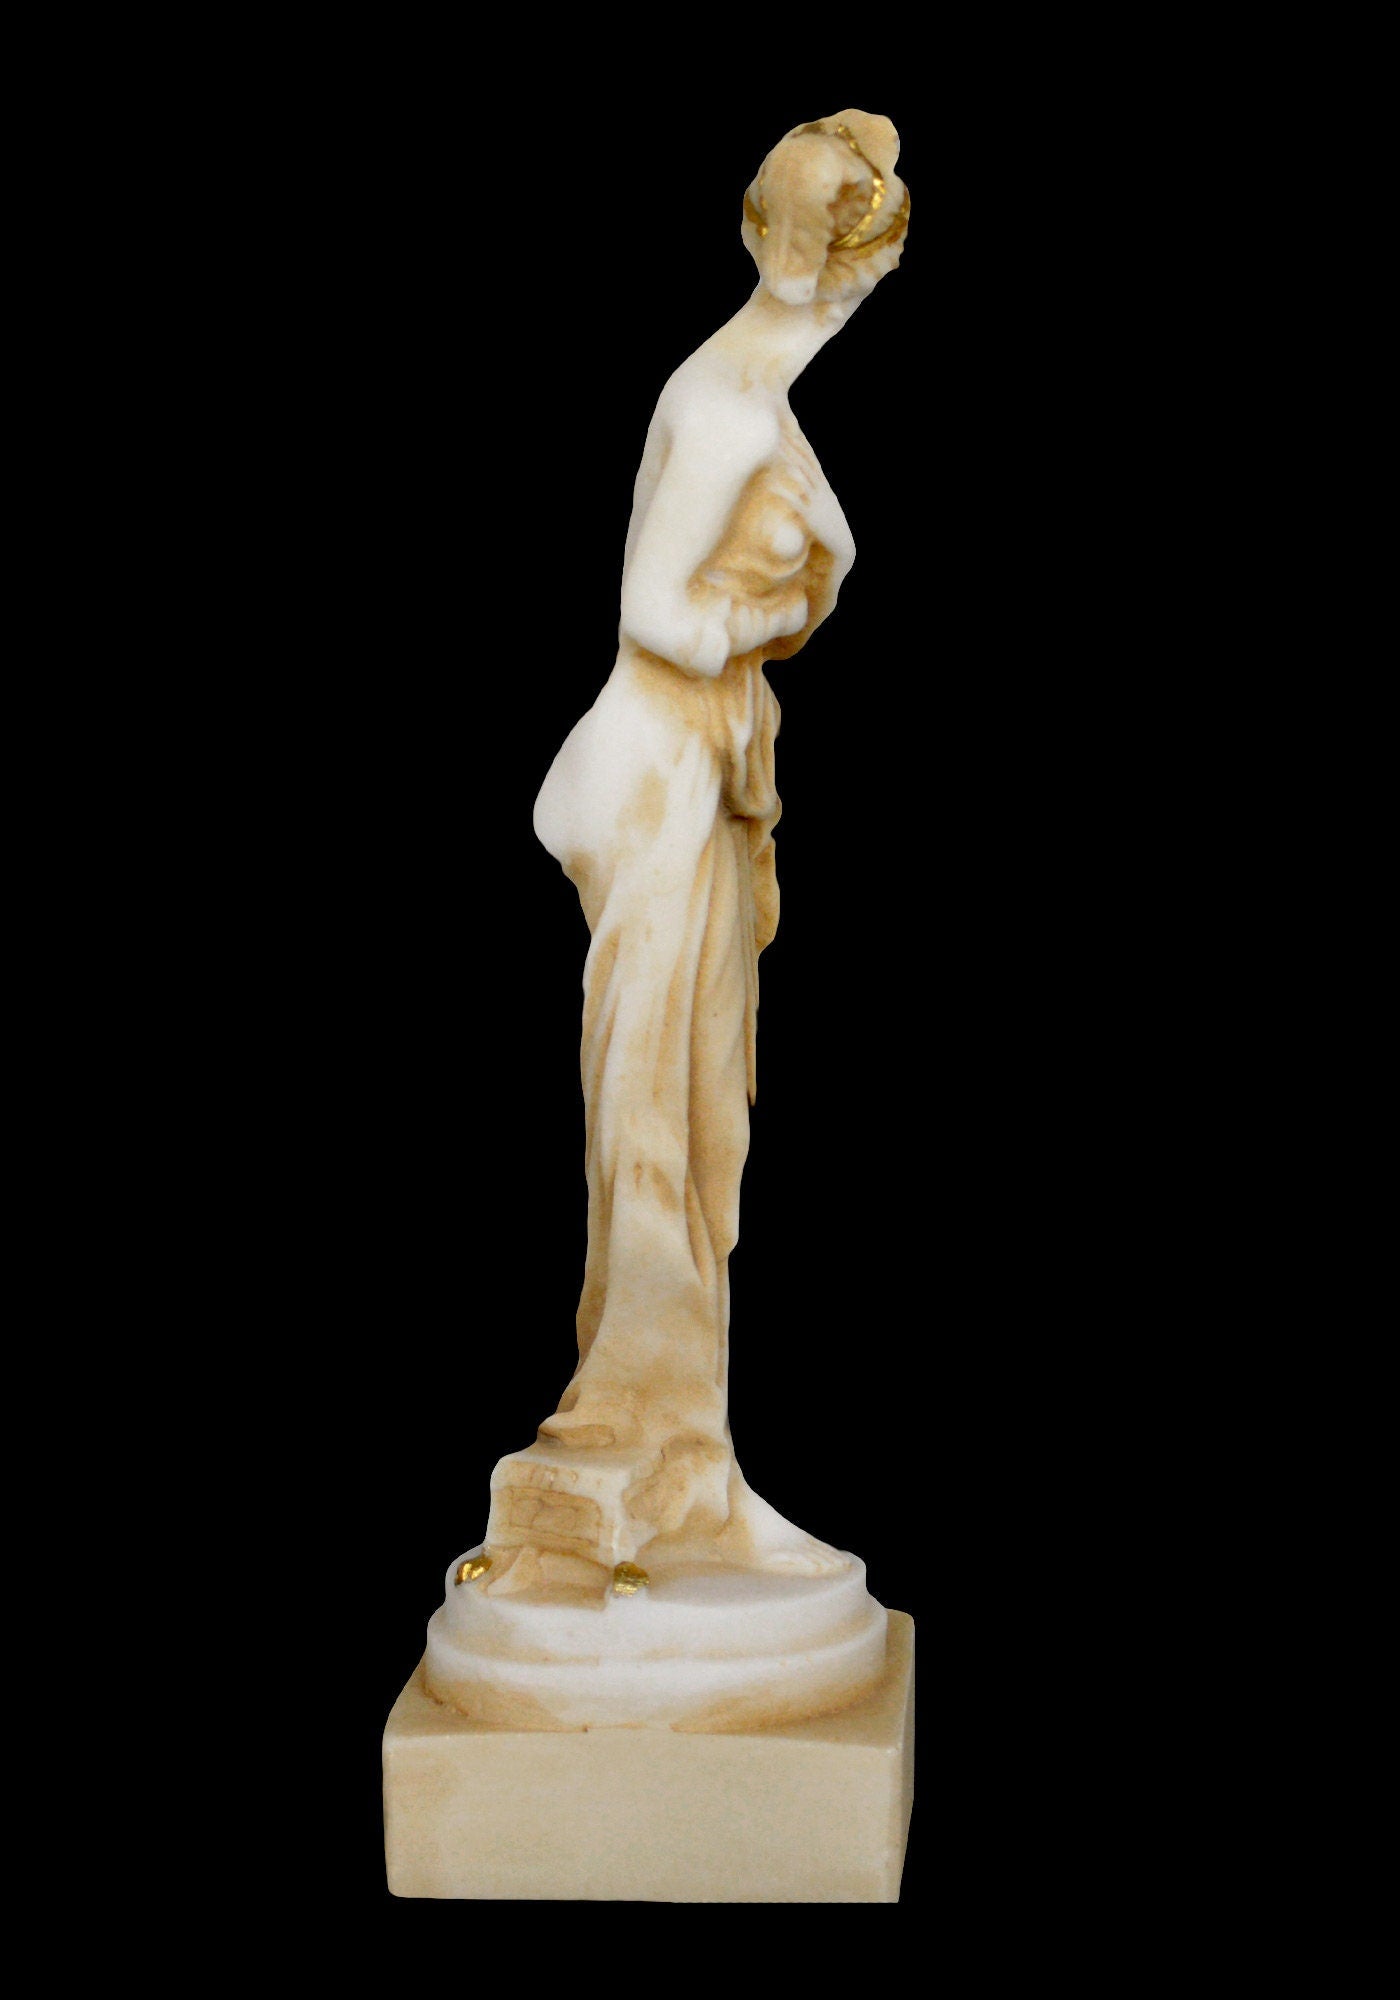 Sappho of Lesbos  -  630–570 BC - Ancient Greek Lyric Poet - Tenth Muse - Ode to Aphrodite - Aged Alabaster Statue